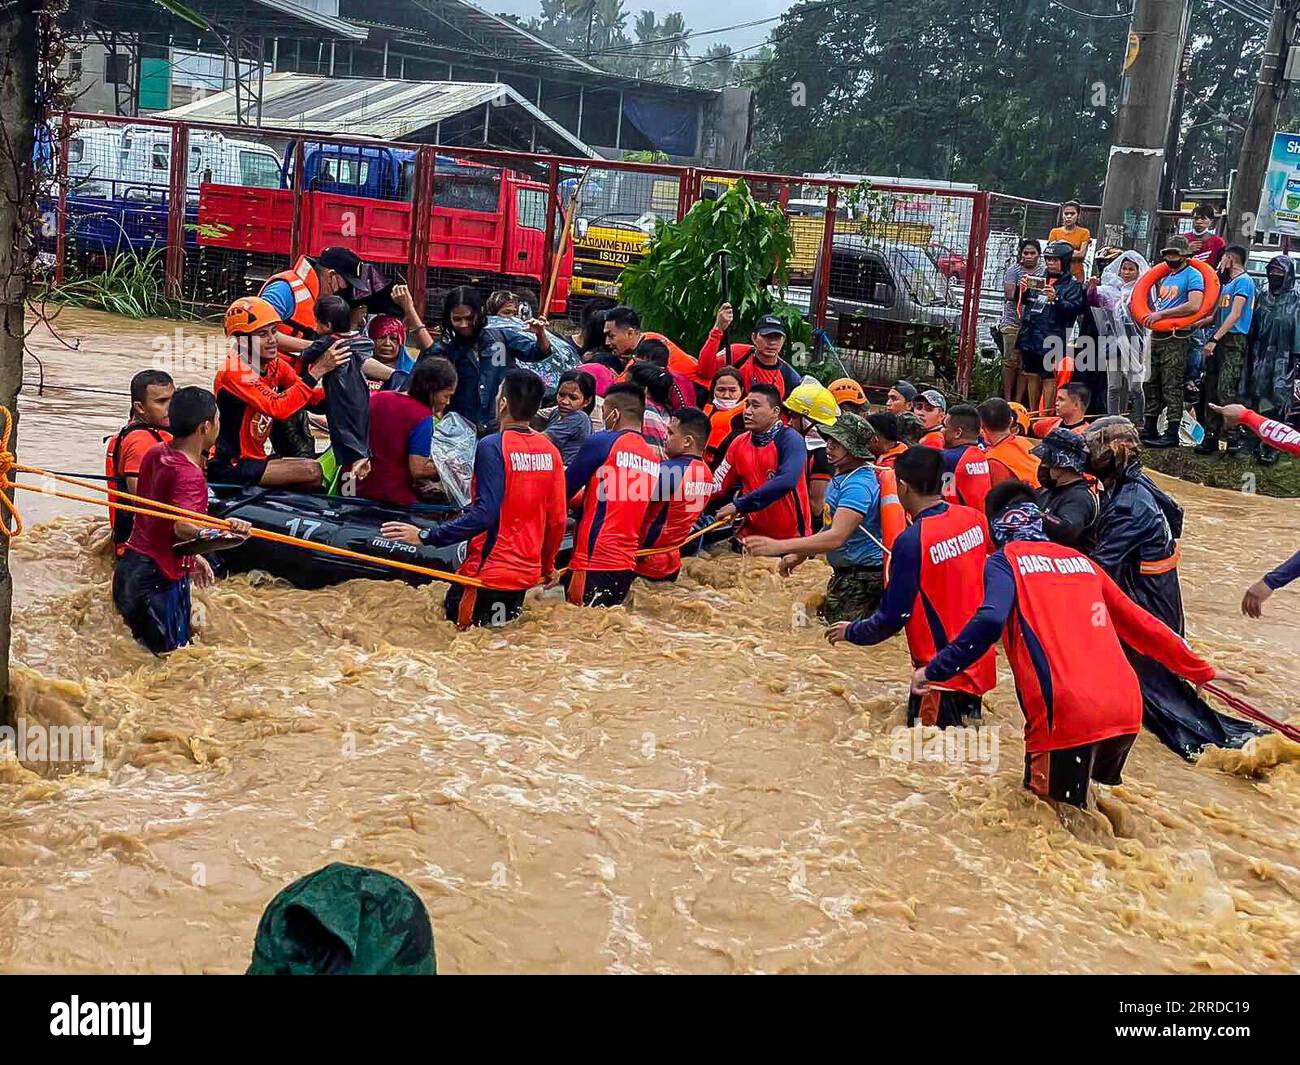 News Themen der Woche KW50 News Bilder des Tages Philippinen, Überschwemmungen als Folge von Taifun Rai 211216 -- CAGAYAN DE ORO CITY, Dec. 16, 2021 -- Members of the rescue residents from the flood brought by typhoon Rai in Cagayan de Oro City, the Philippines, Dec. 16, 2021. Typhoon Rai, one of the strongest battering the Philippines this year, made landfall in Siargao Island in the southern Philippines on Thursday afternoon, the Philippines weather bureau said. Thousands of residents along its path were forced to be evacuated to safety. /Handout via Xinhua PHILIPPINES-CAGAYAN DE ORO CITY-TY Stock Photo